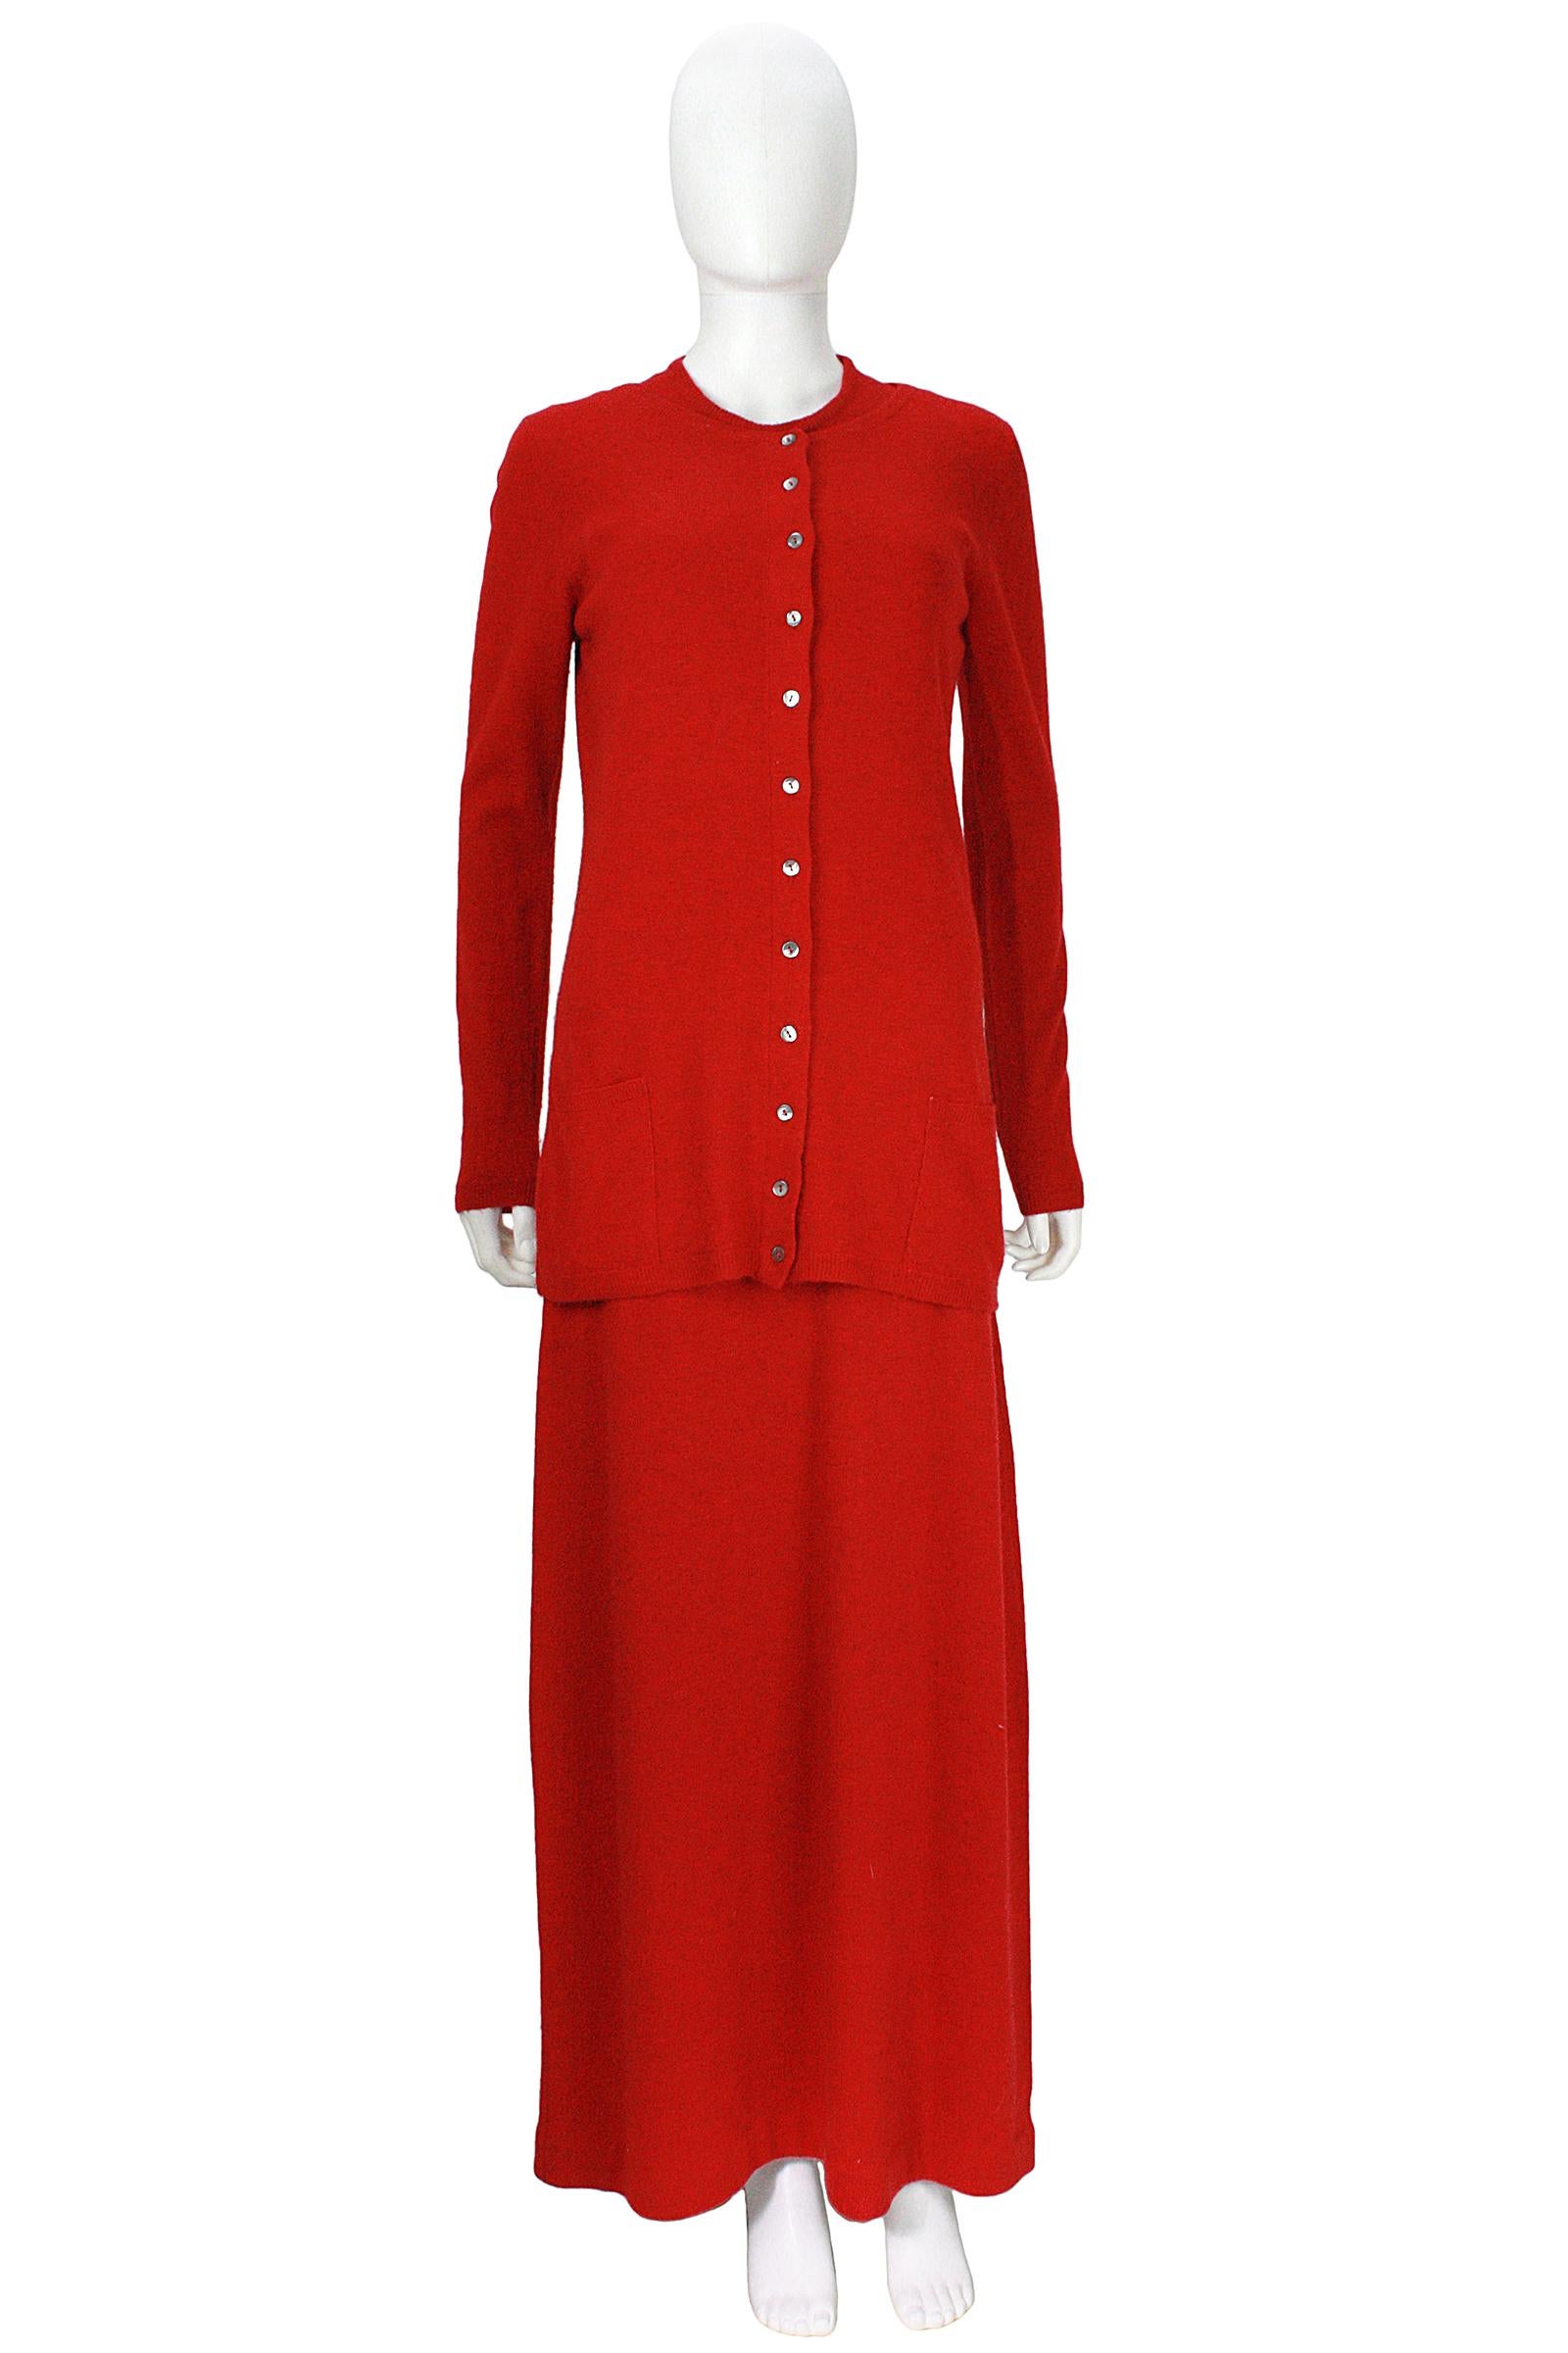 Halston long tank dress  
Cardigan with two pockets and iridescent buttons 
Red cashmere 
Measurements:
Dress bust: 32-36